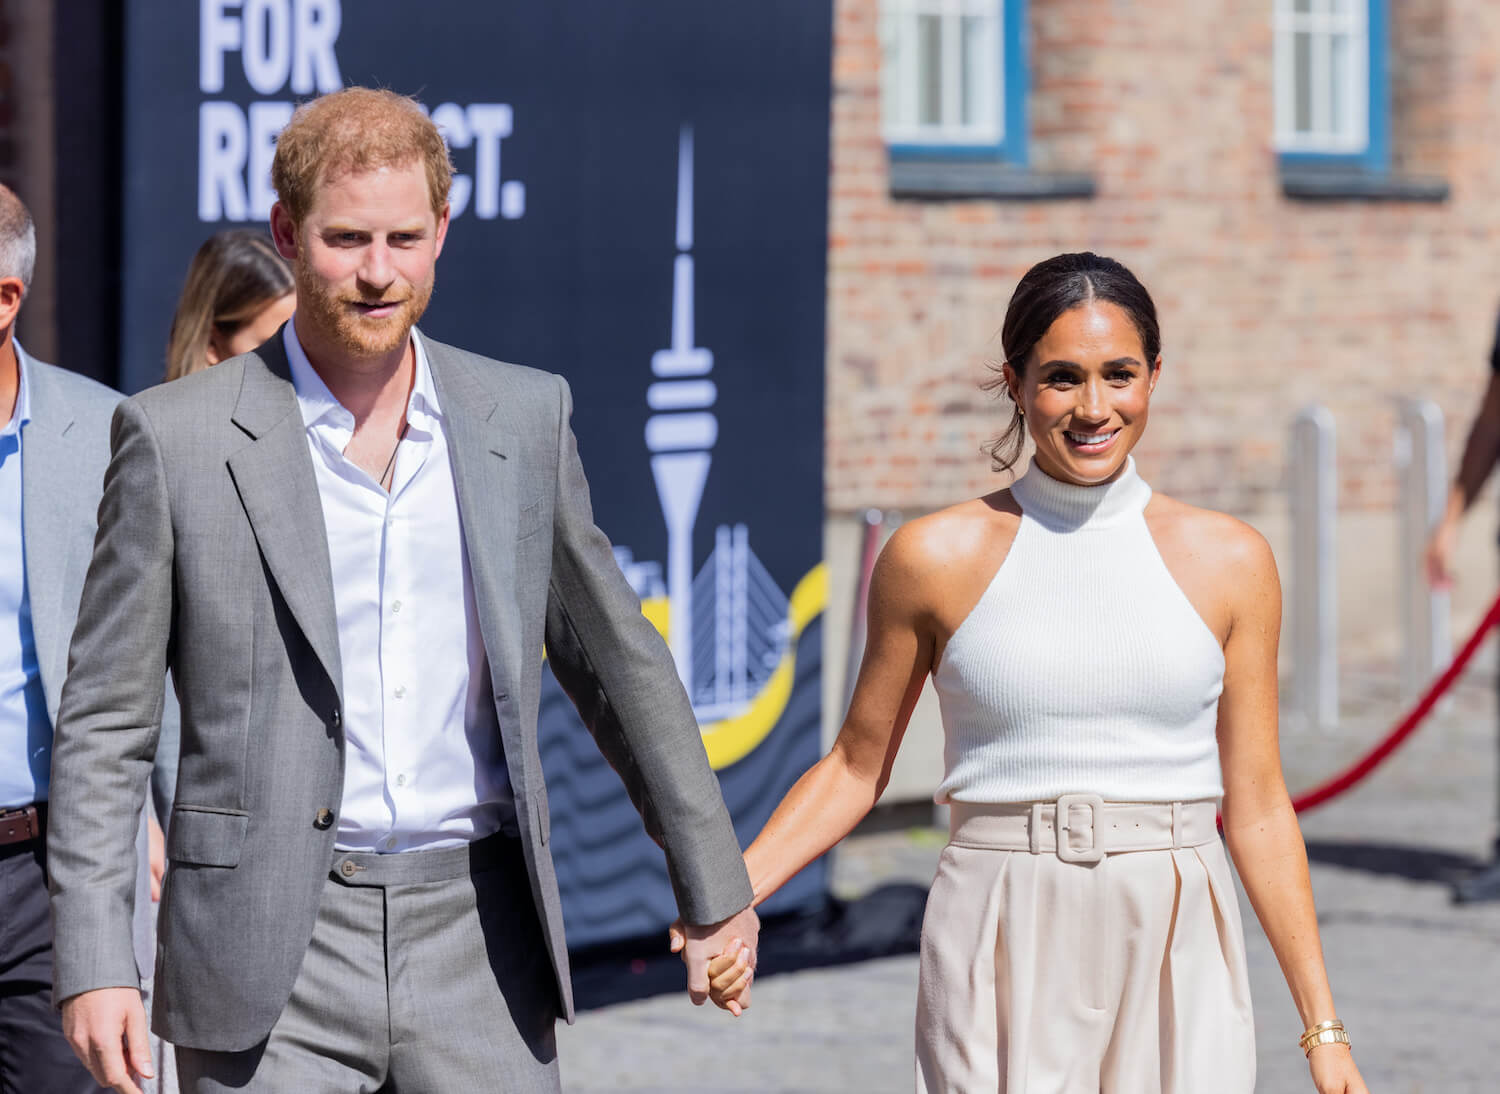 Prince Harry wears a gray suit and smiles while holding hands with Meghan Markle, dressed in tan pants and a white top